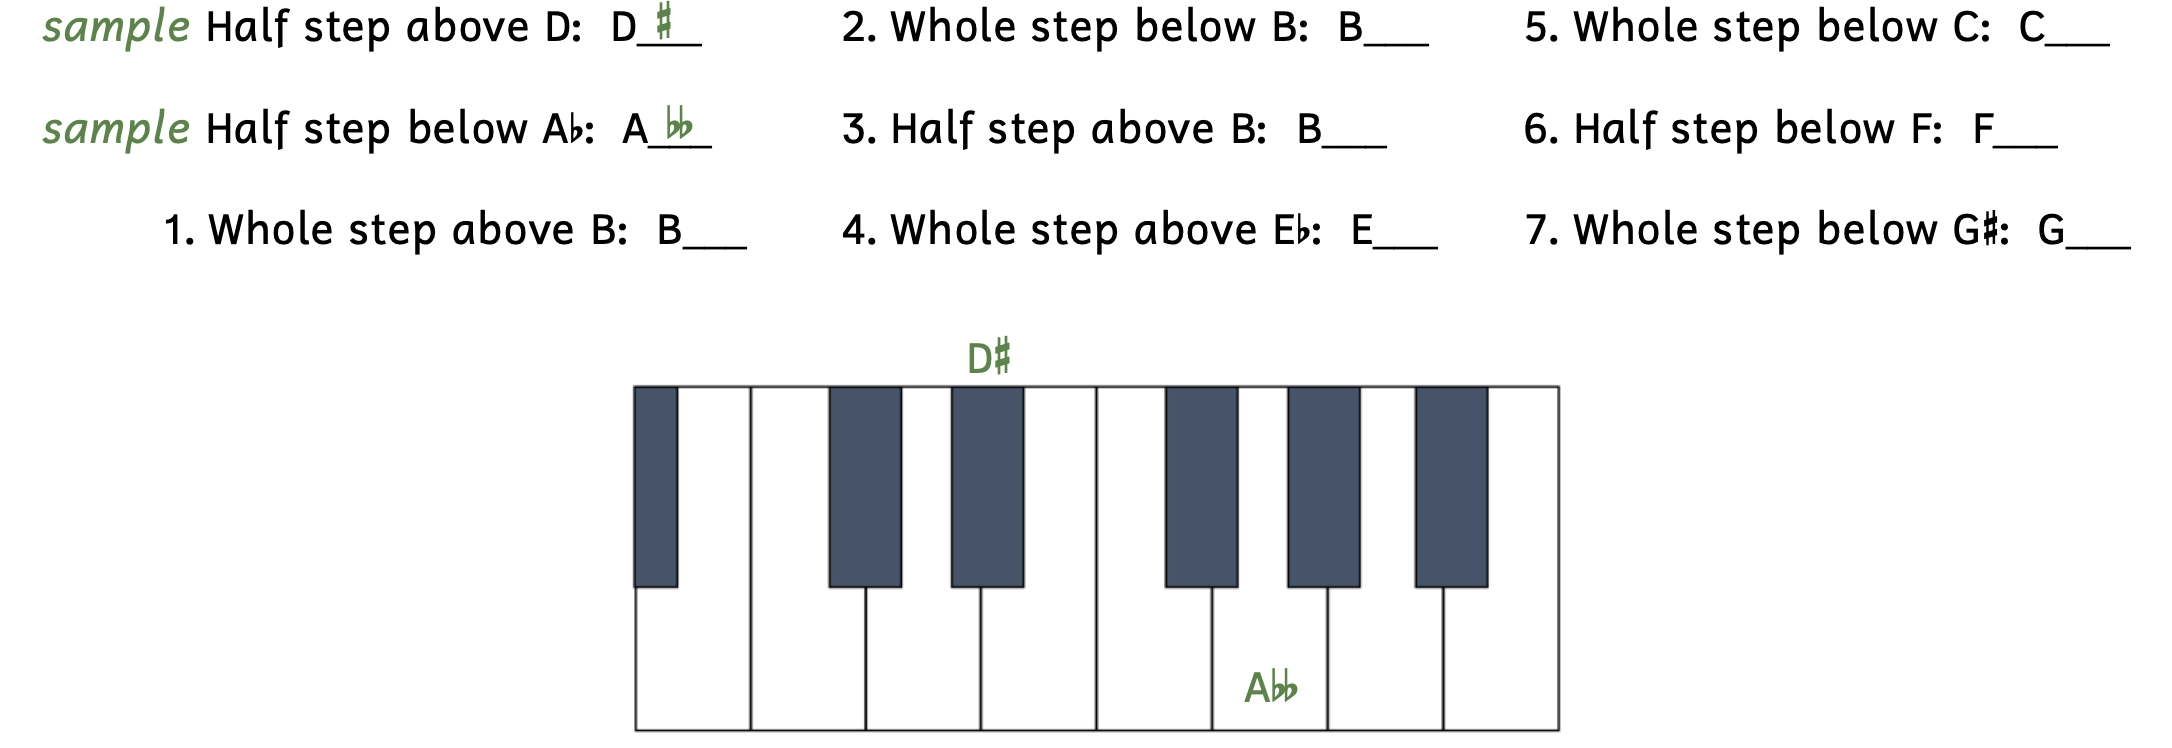 Exercise writing half and whole steps using accidentals. The first sample asks for a half step above D, which is D-sharp. Then D# is written above the black key to the left of D on the keyboard. The second sample asks for a half step below A-flat, which is A-double-flat. Then A-double-flat is written on the white key on the keyboard that looks like G. Number 1 asks for a whole step above B. Number 2 asks for a whole step below B. Number 3 asks for a half step above B. Number 4 asks for a whole step above E-flat. Number 5 asks for a whole step below C. Number 6 asks for a half step below F. Number 7 asks for a whole step below G-sharp.